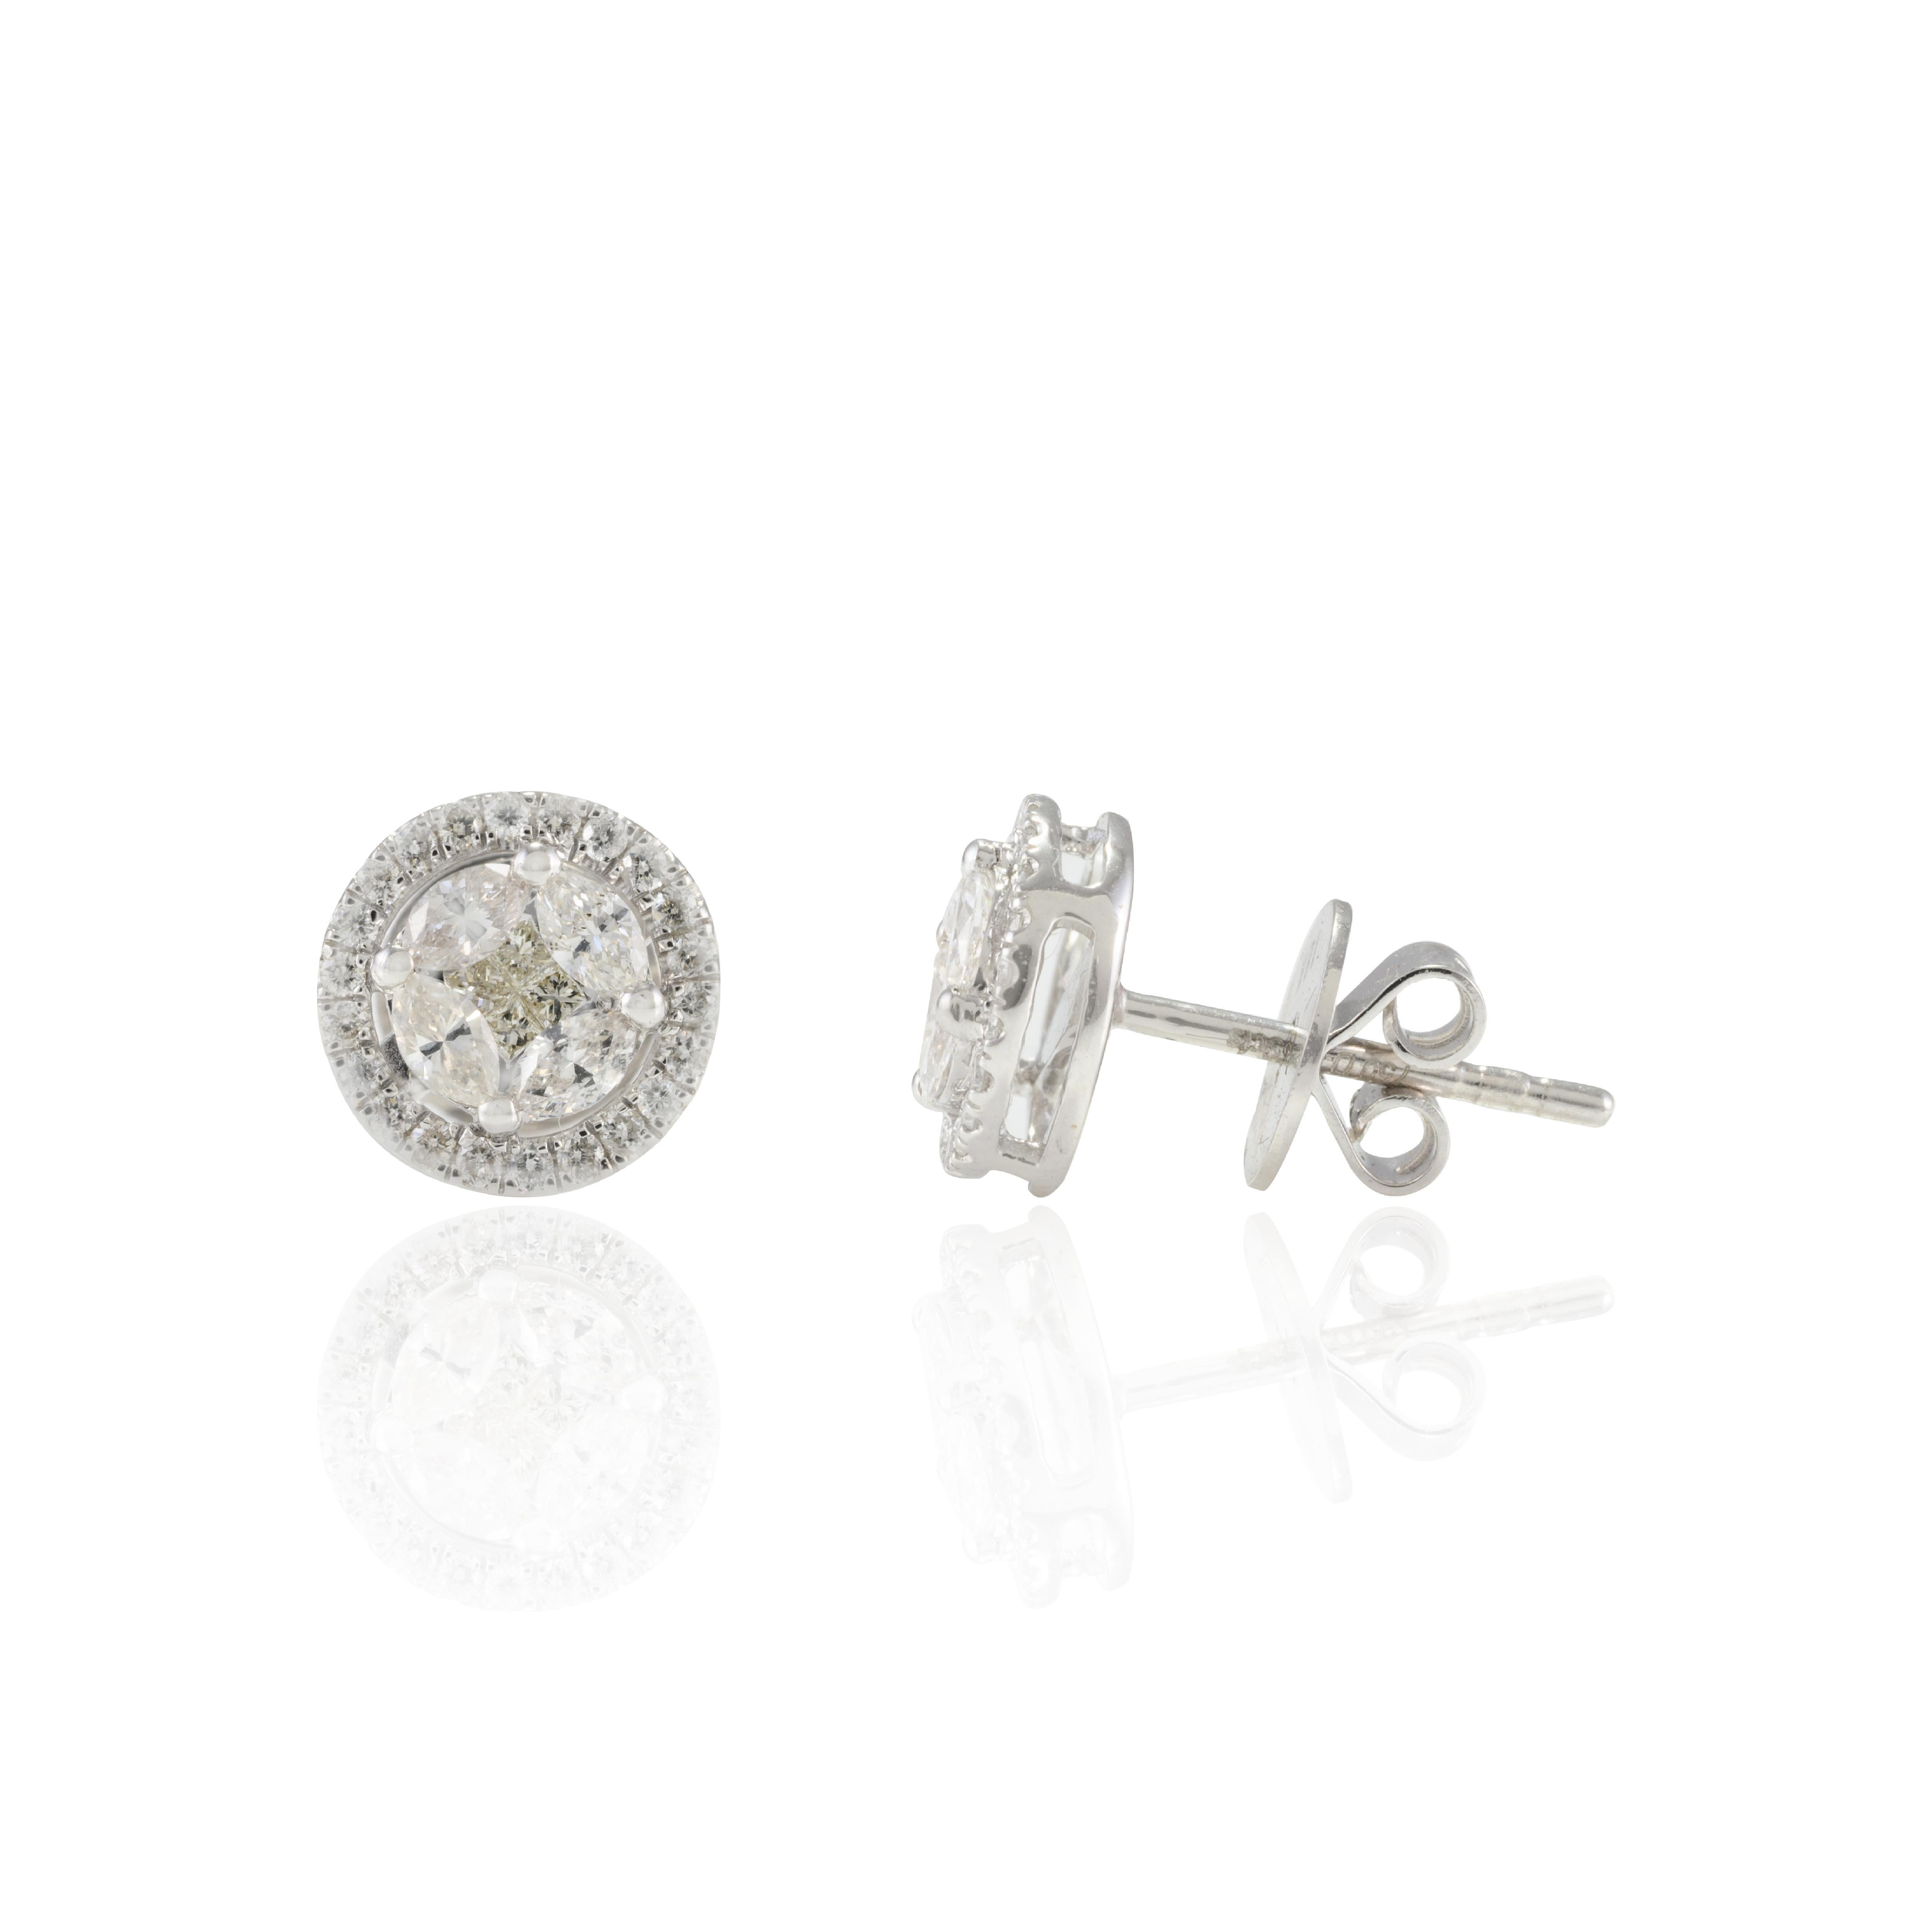 Stunning Natural Diamond Round Studs Earring in 18K Gold to make a statement with your look. You shall need stud earrings to make a statement with your look. These earrings create a sparkling, luxurious look featuring brilliant cut diamonds.
April